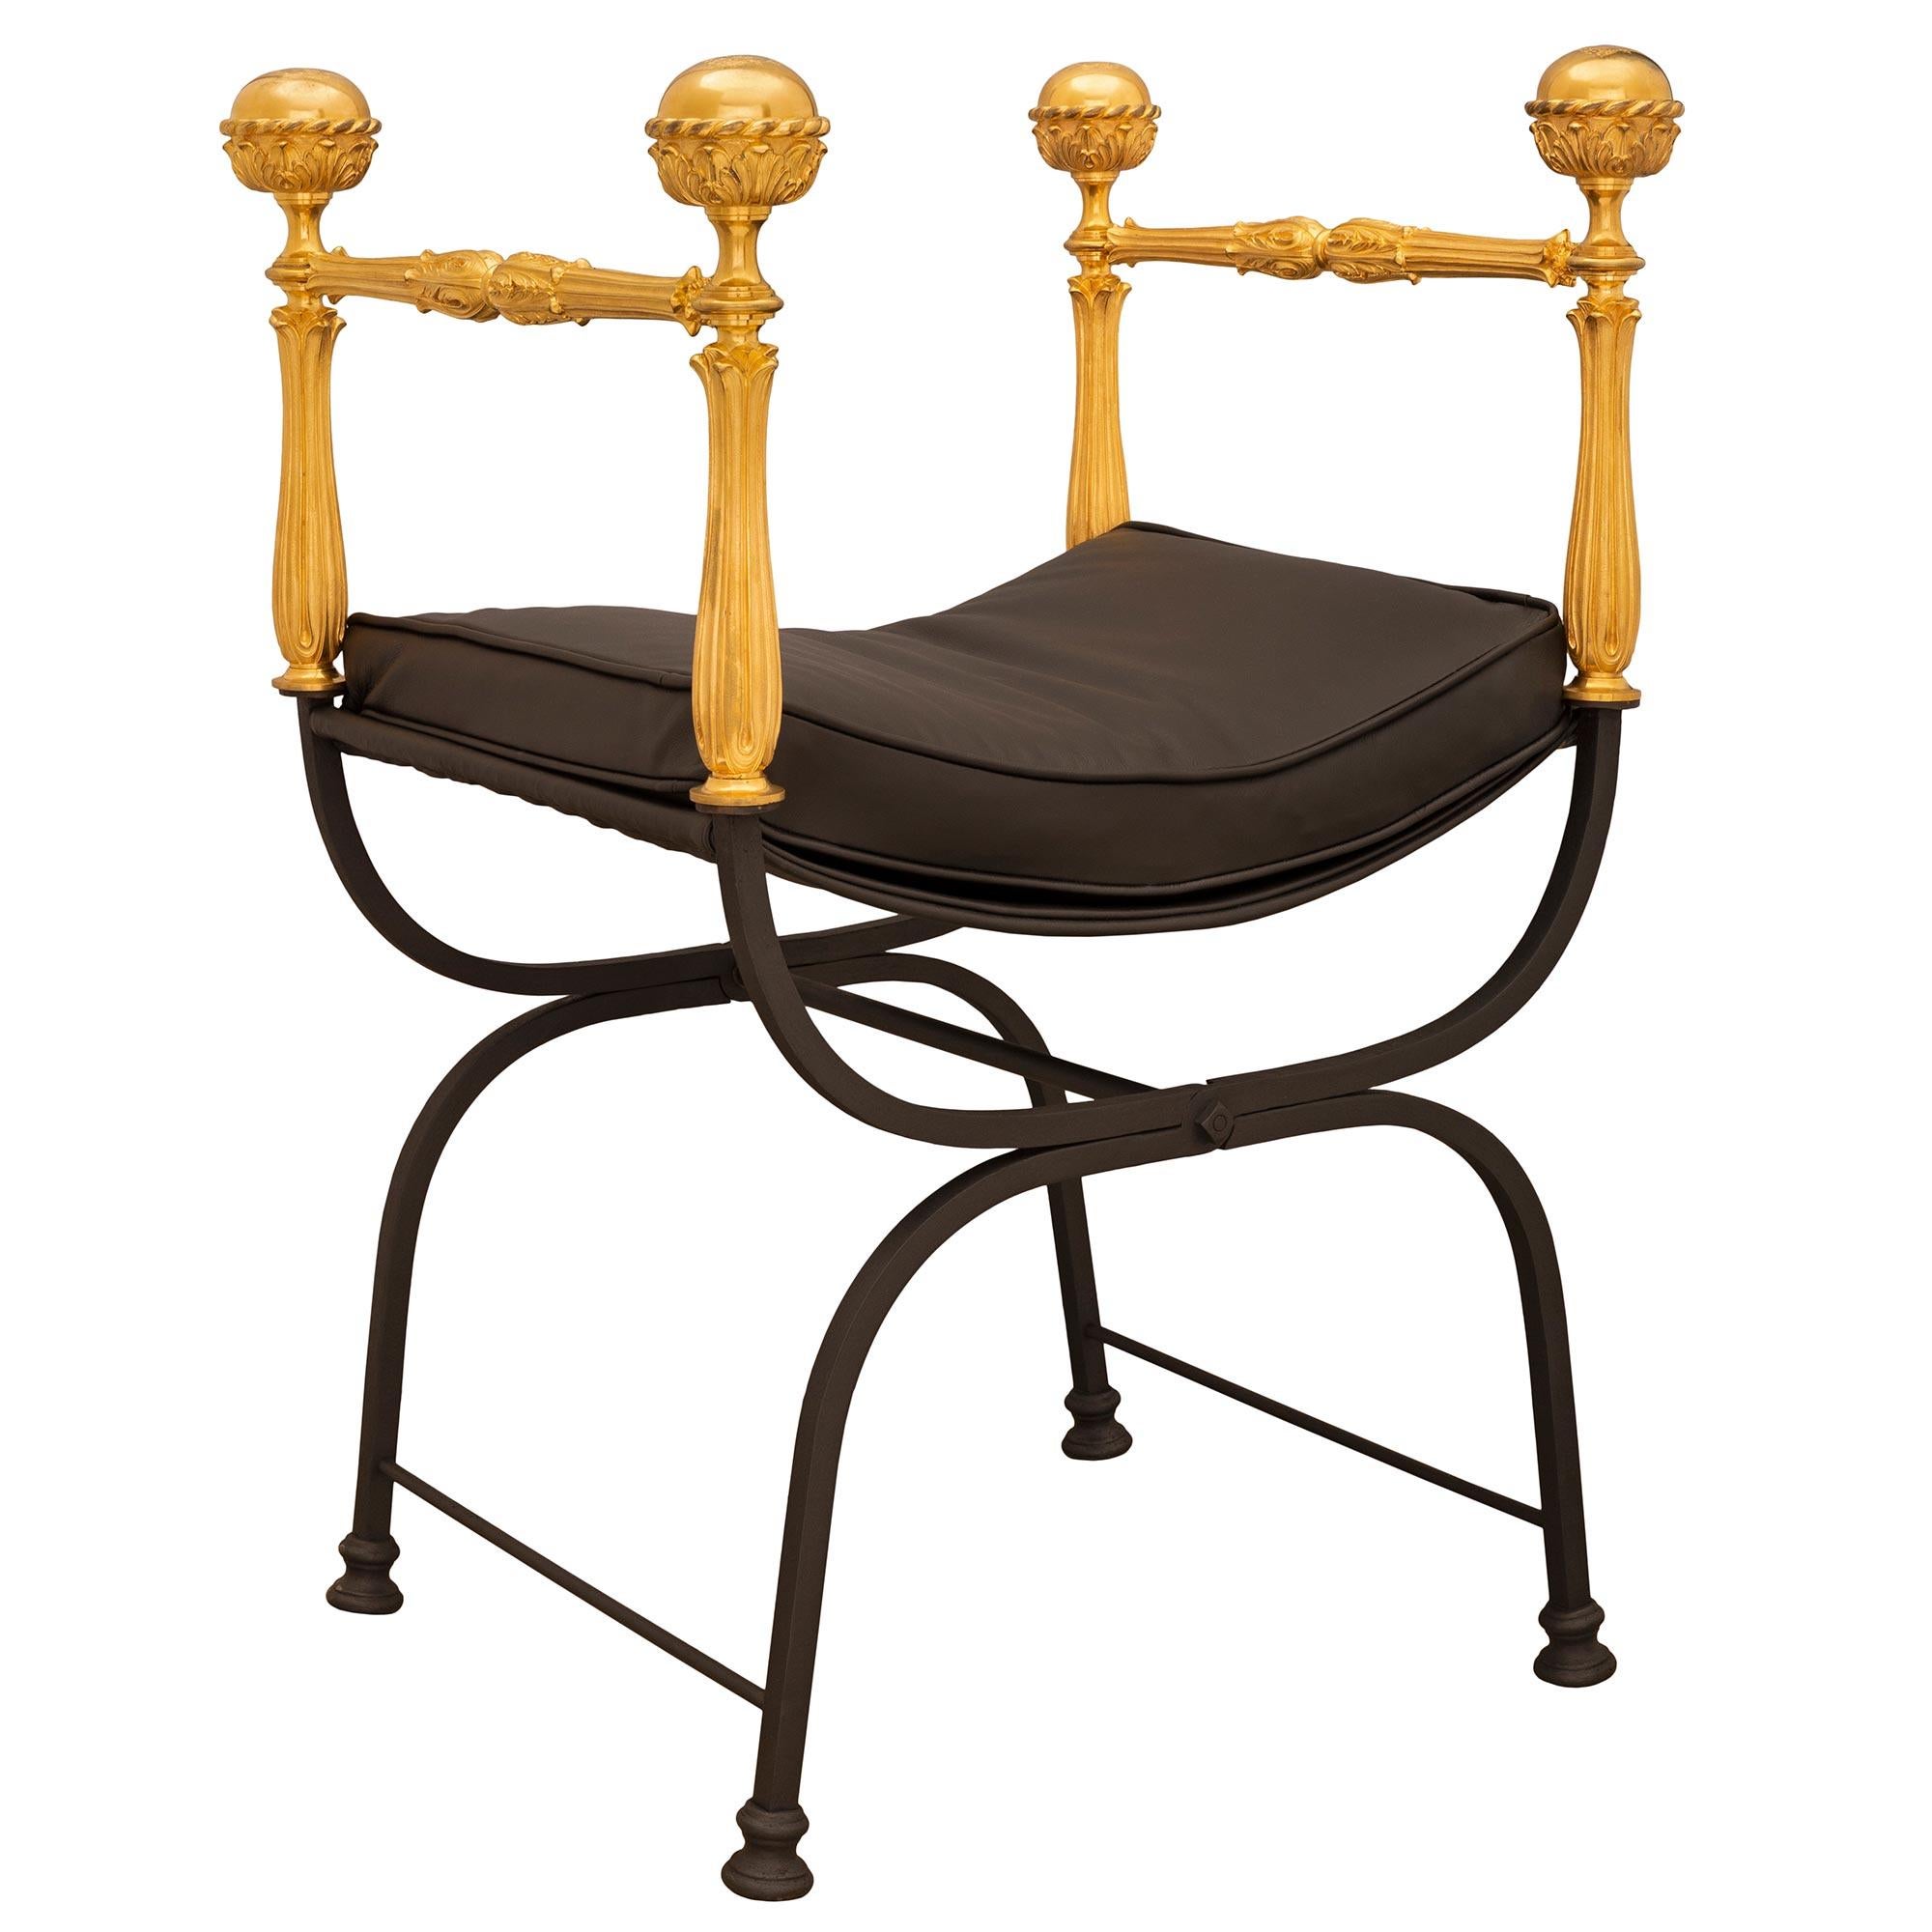 A striking and most decorative Italian 20th century Renaissance st. wrought iron and ormolu Savanarola bench. The folding bench is raised by a beautiful X-shaped wrought iron base with fine circular mottled feet connected by a stretcher. Above are